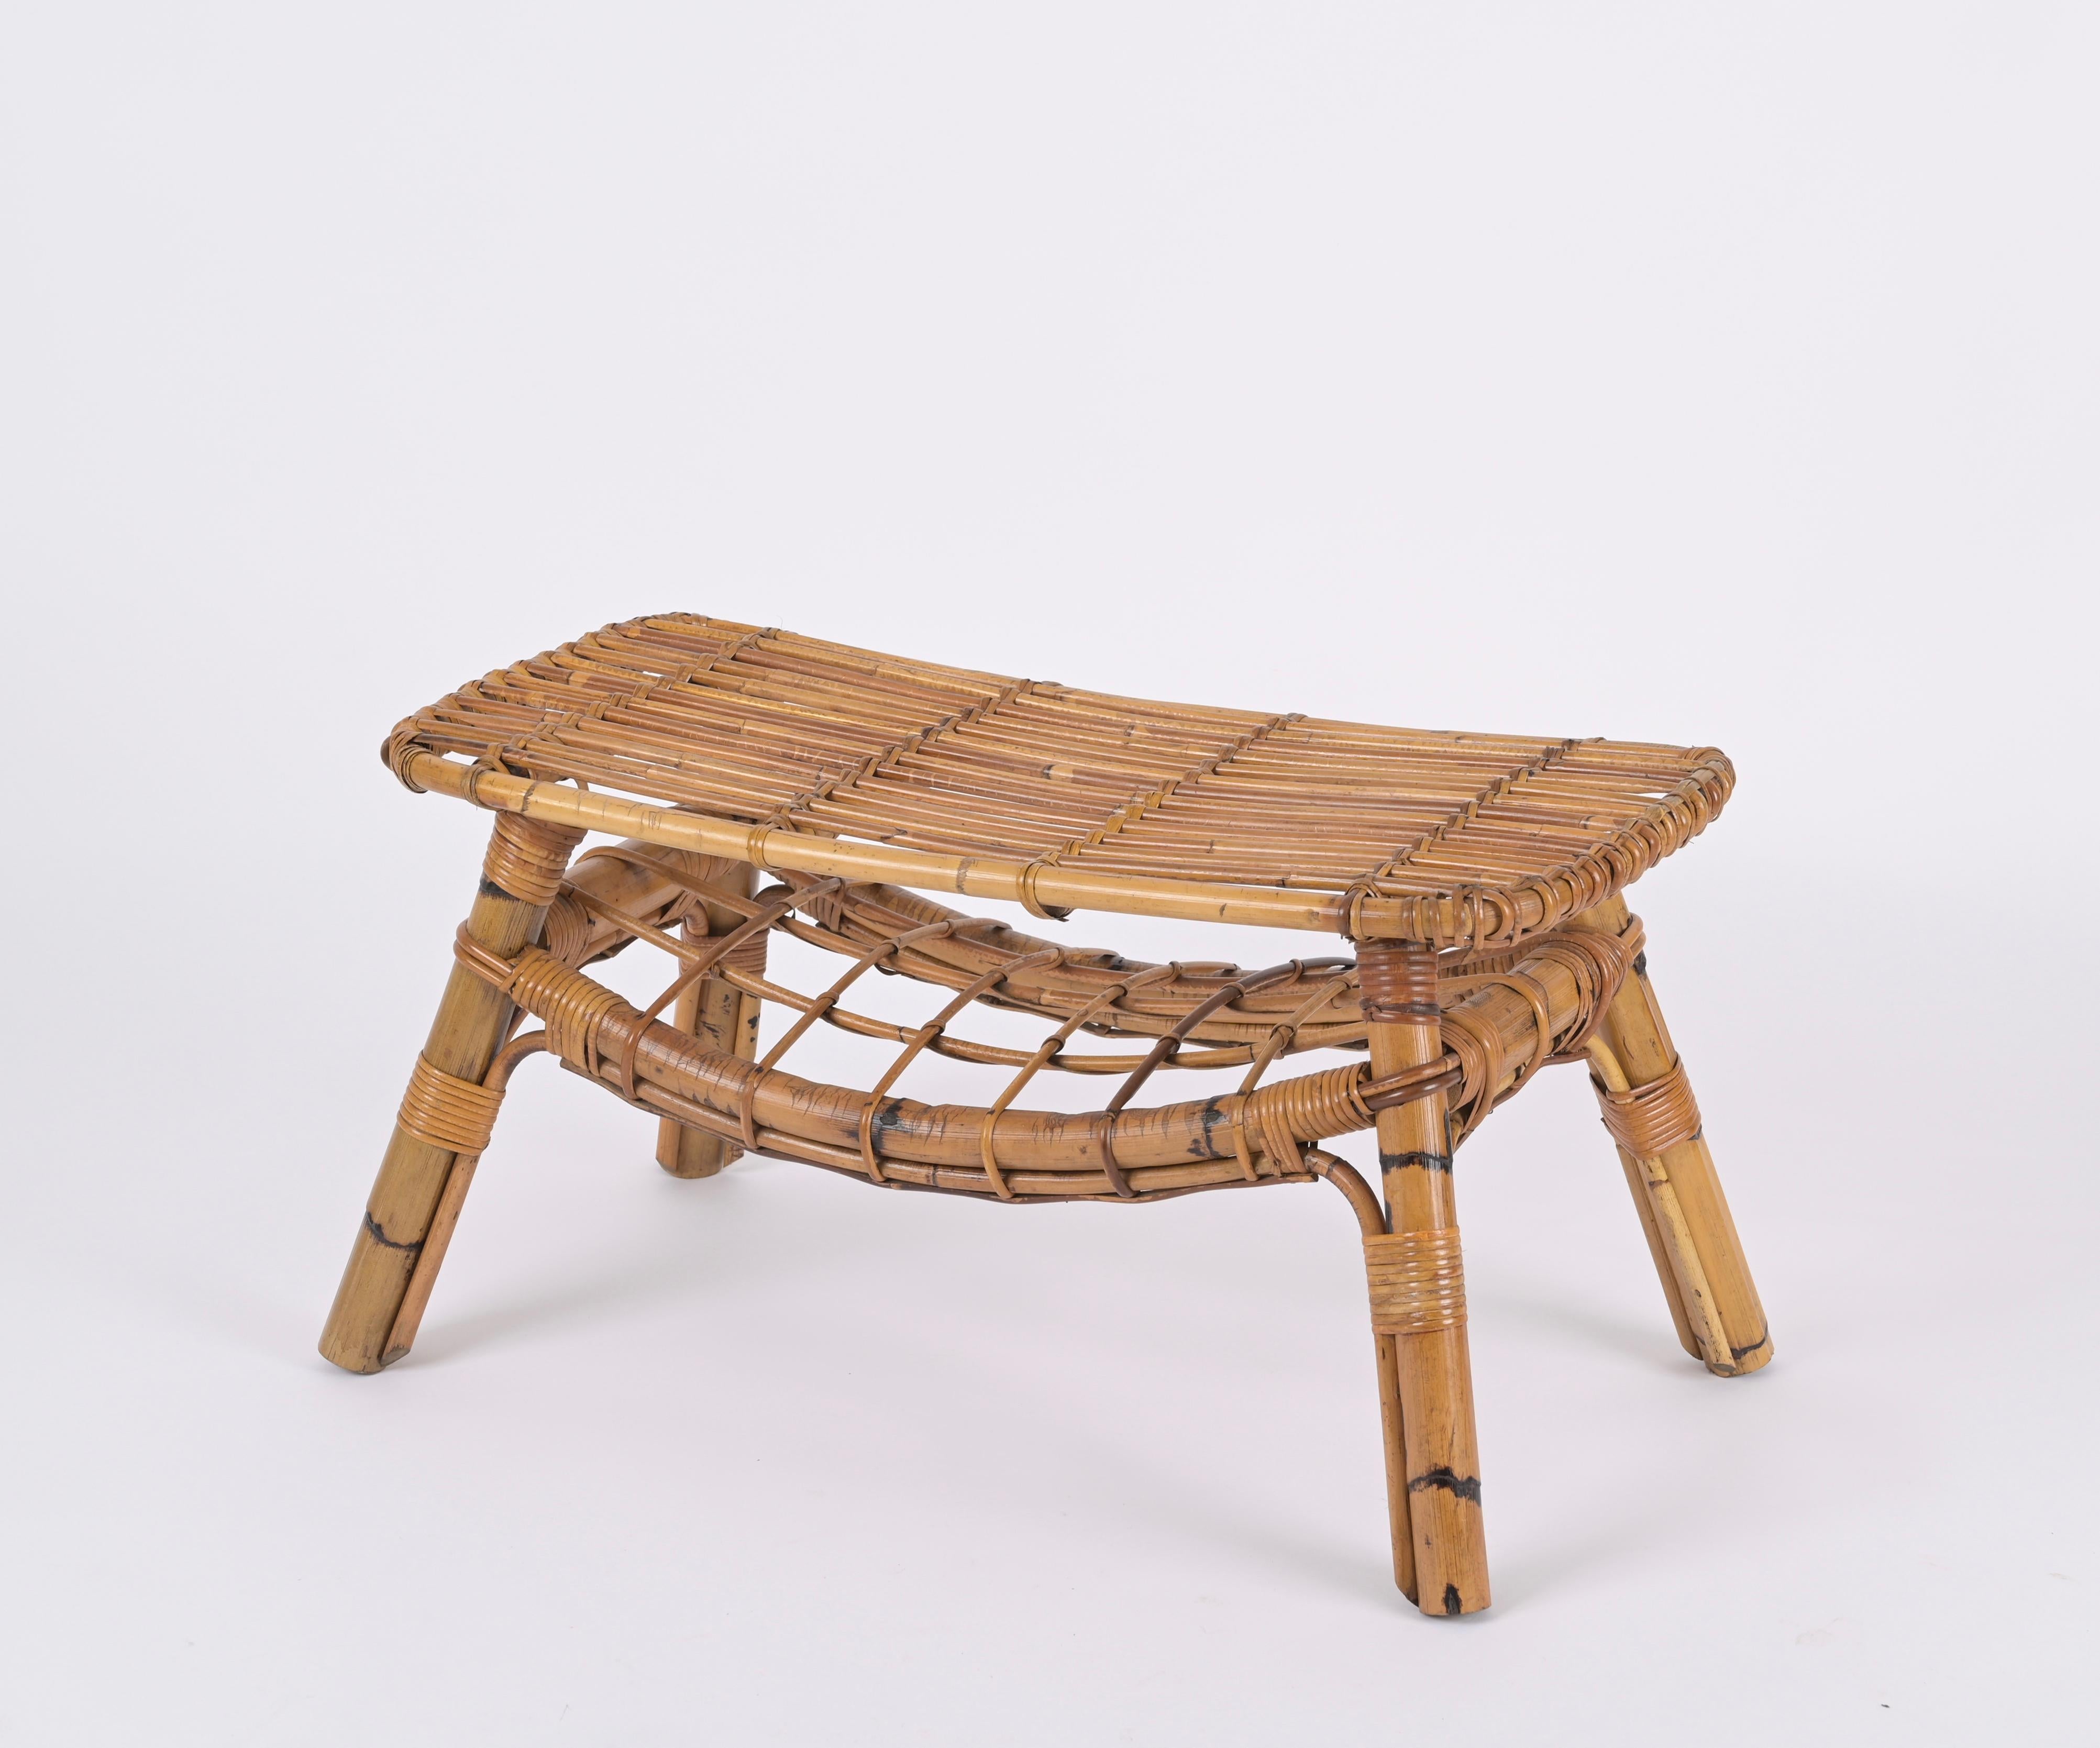 Hand-Woven Italian Coffee Table or Bench in Rattan and Wicker by Tito Agnoli, 1960s For Sale